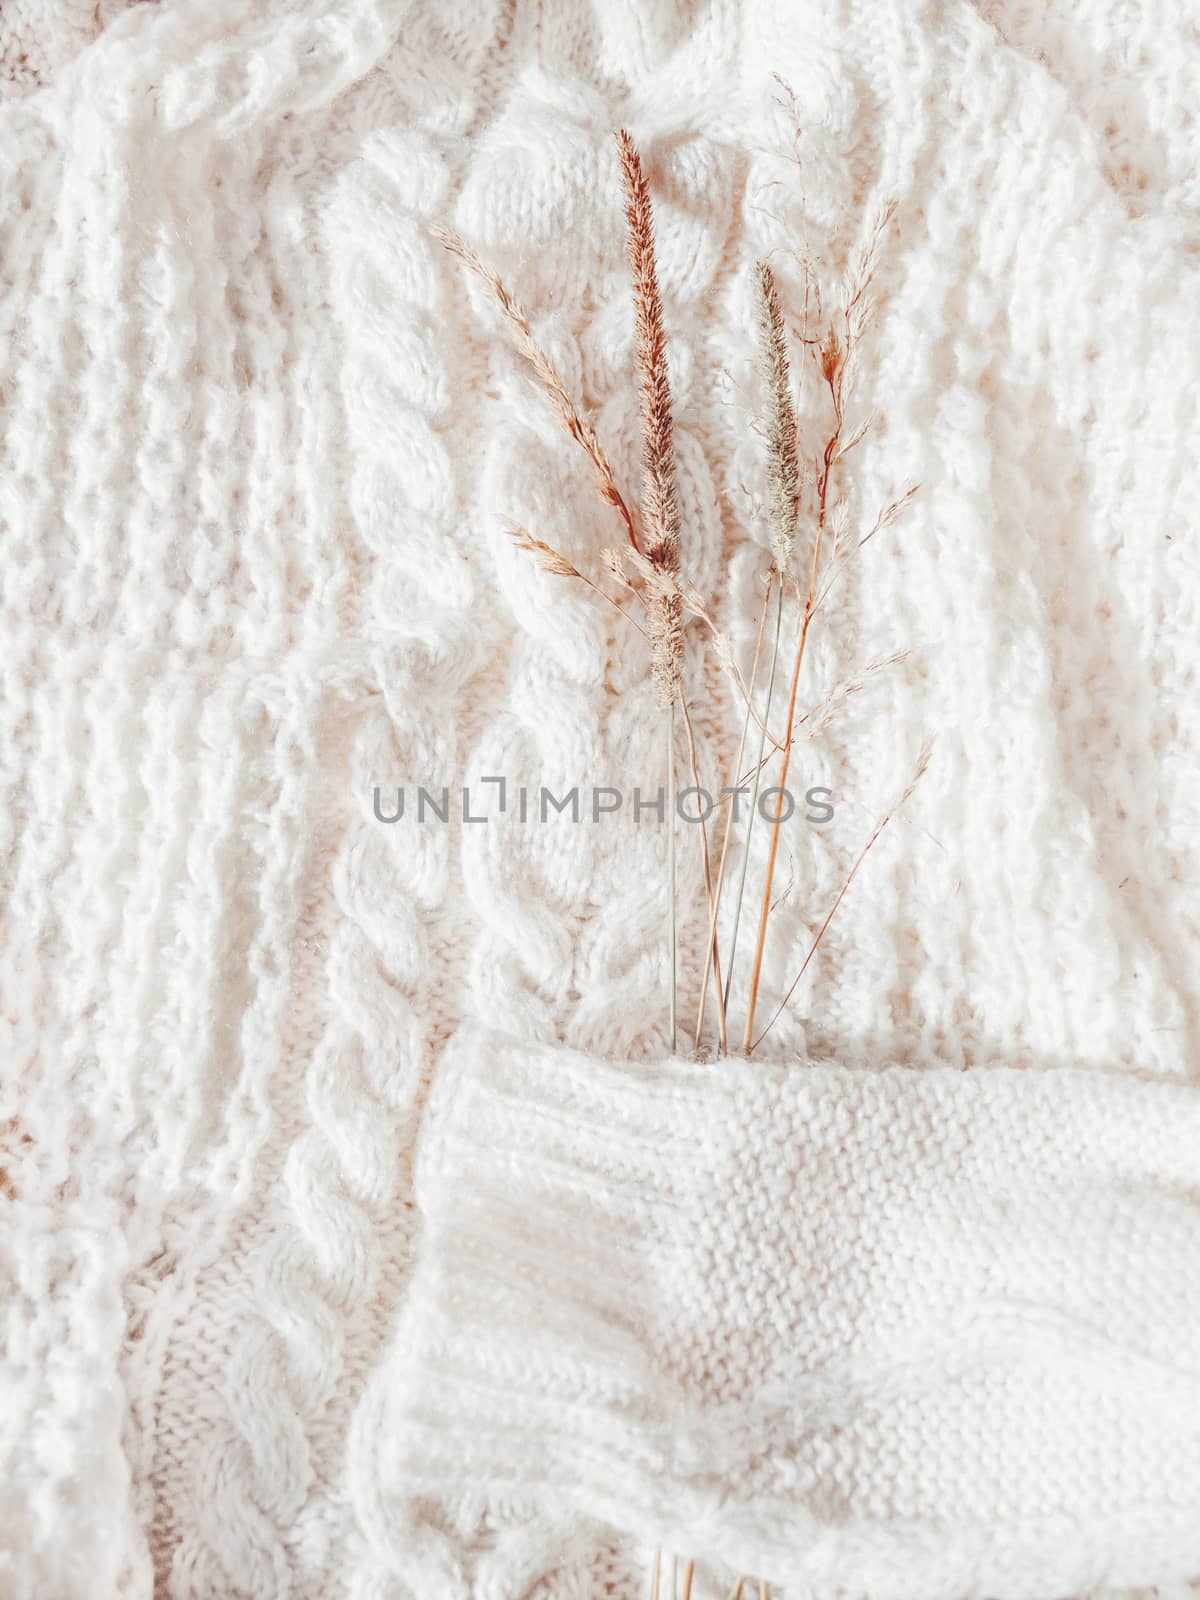 Top view on white knitted sweater with dried grass. Autumn concept flat lay. Warm cardigan with plants on it. Rustic authentic lifestyle background.